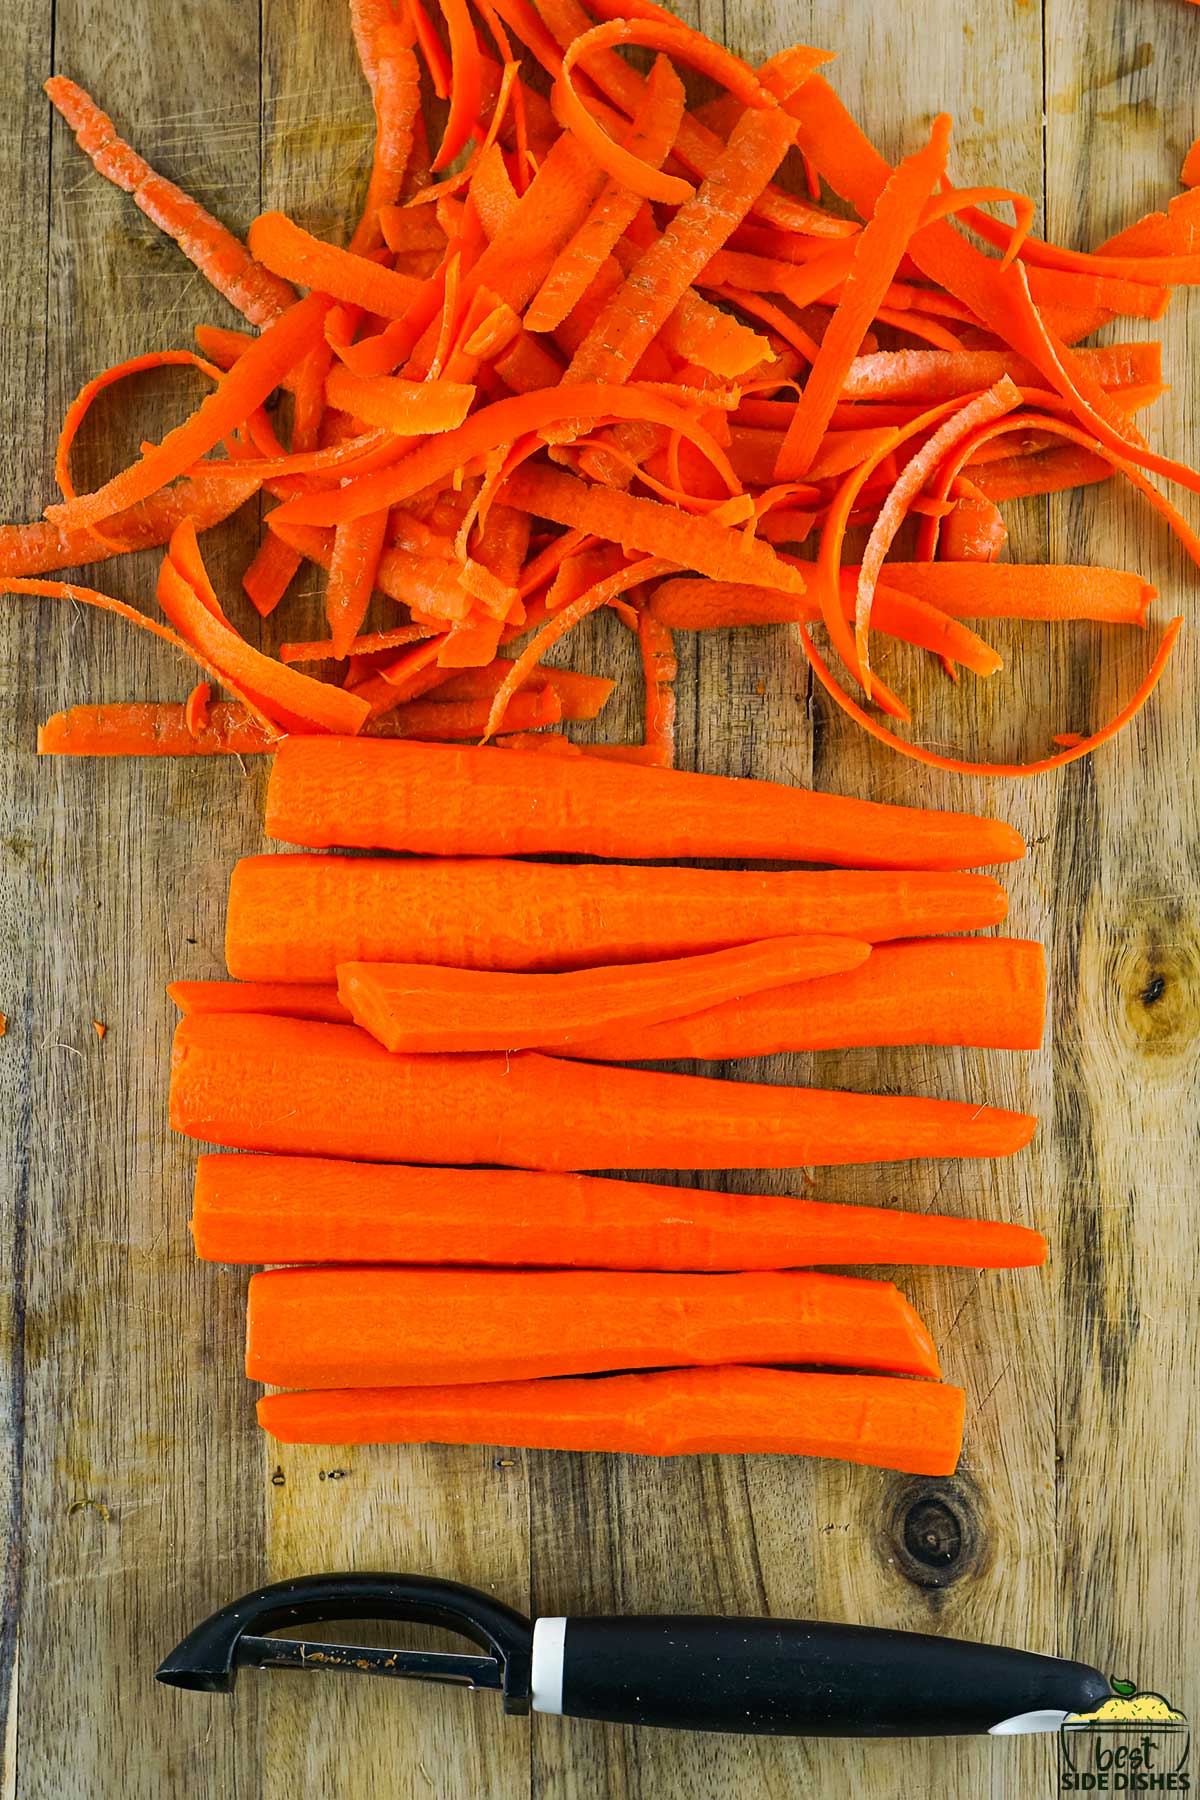 peeled carrots, carrot peels and a carrot peeler on a wooden cutting board